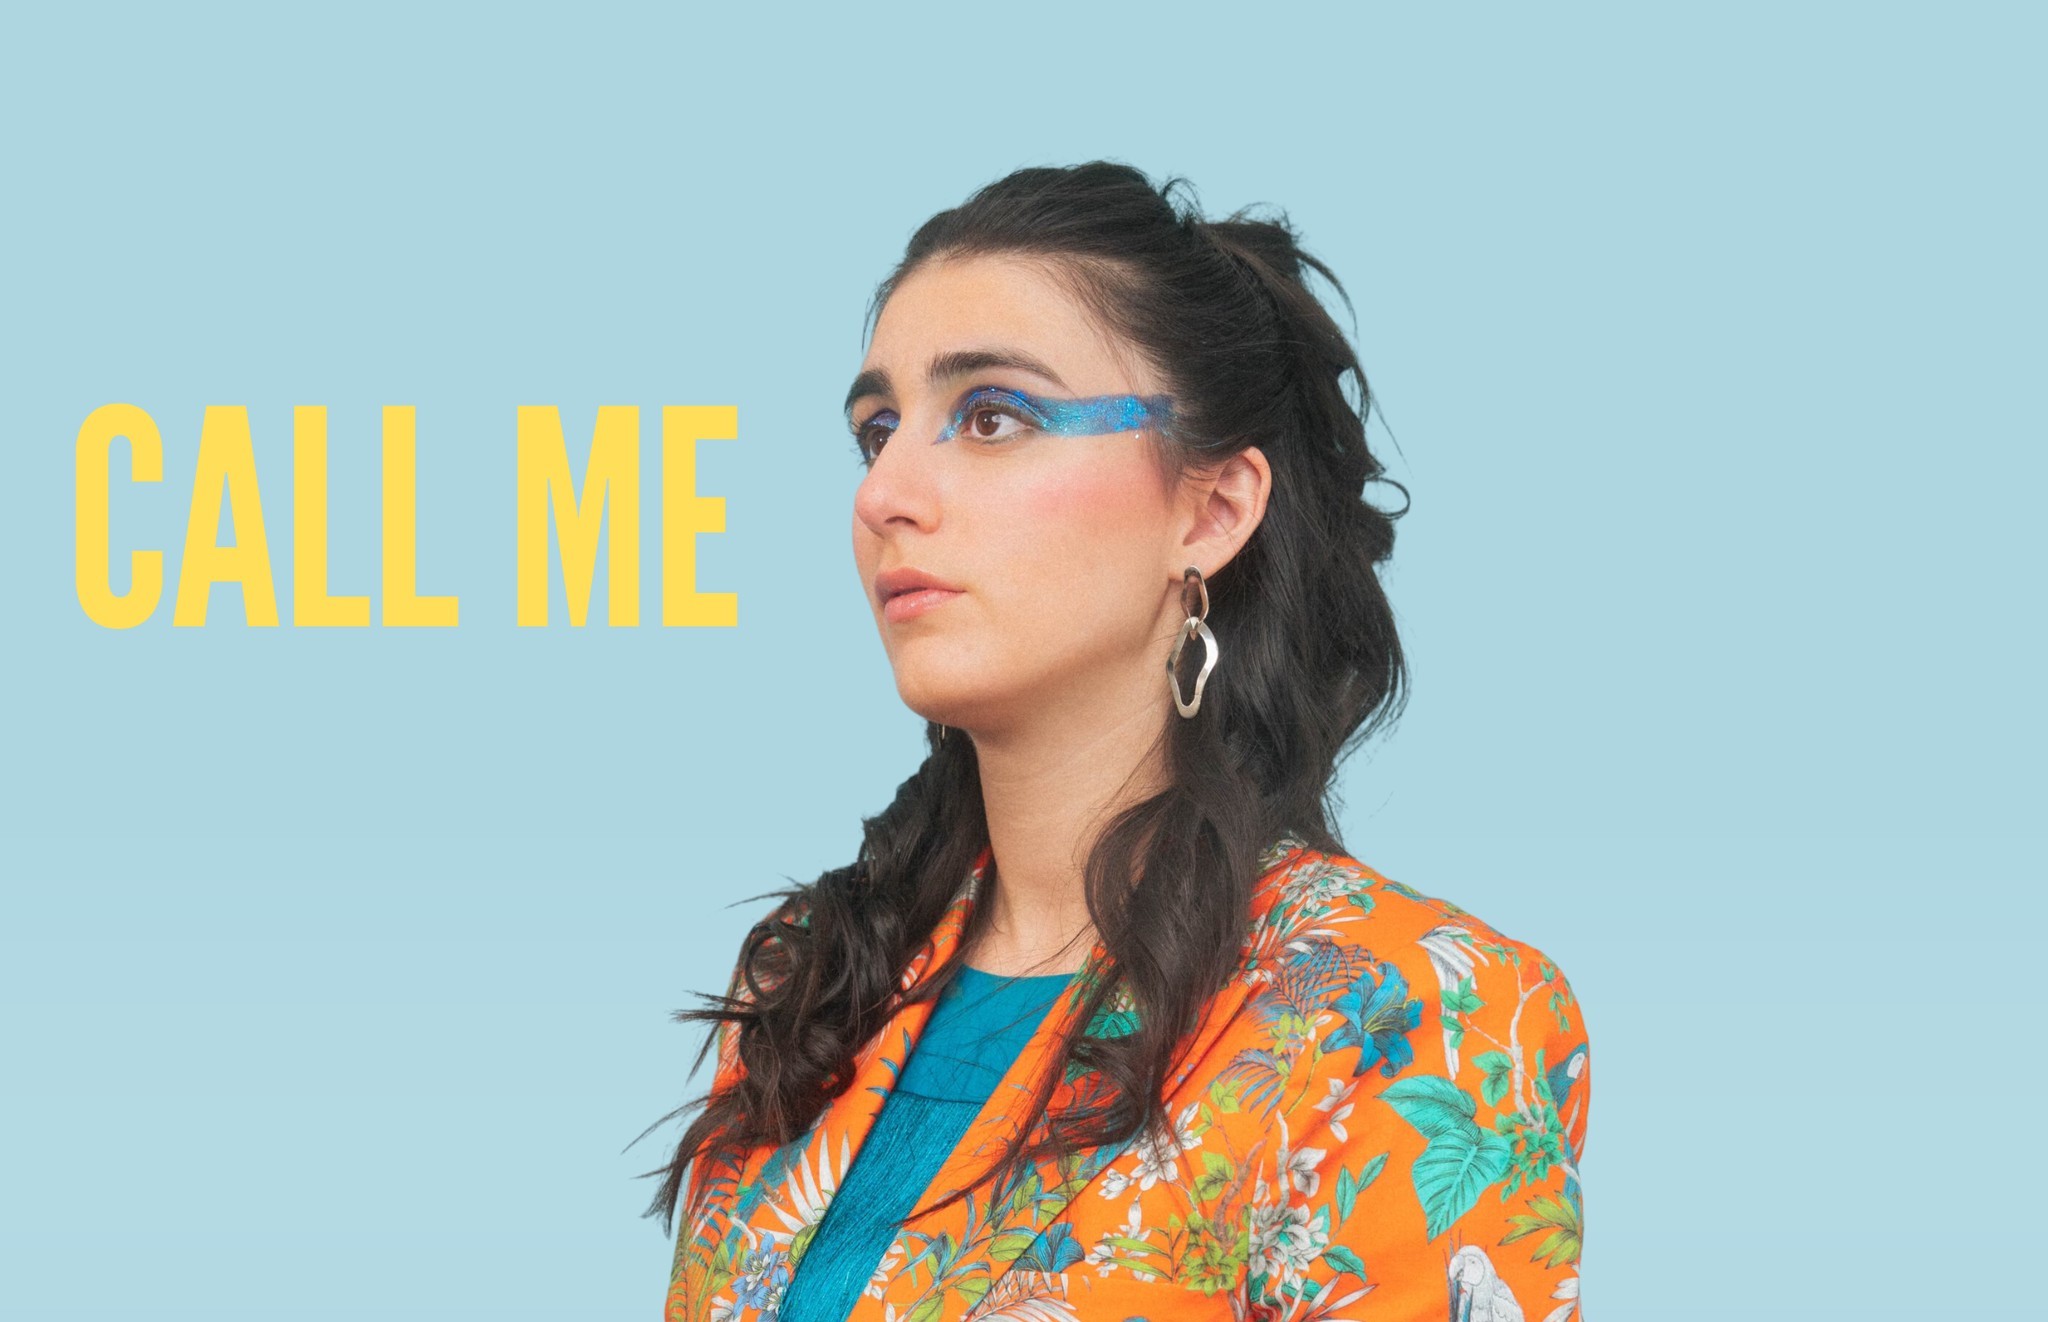 Kate Cosentino Pays Homage to Her Time on The Voice with Sultry Cover of “Call Me”